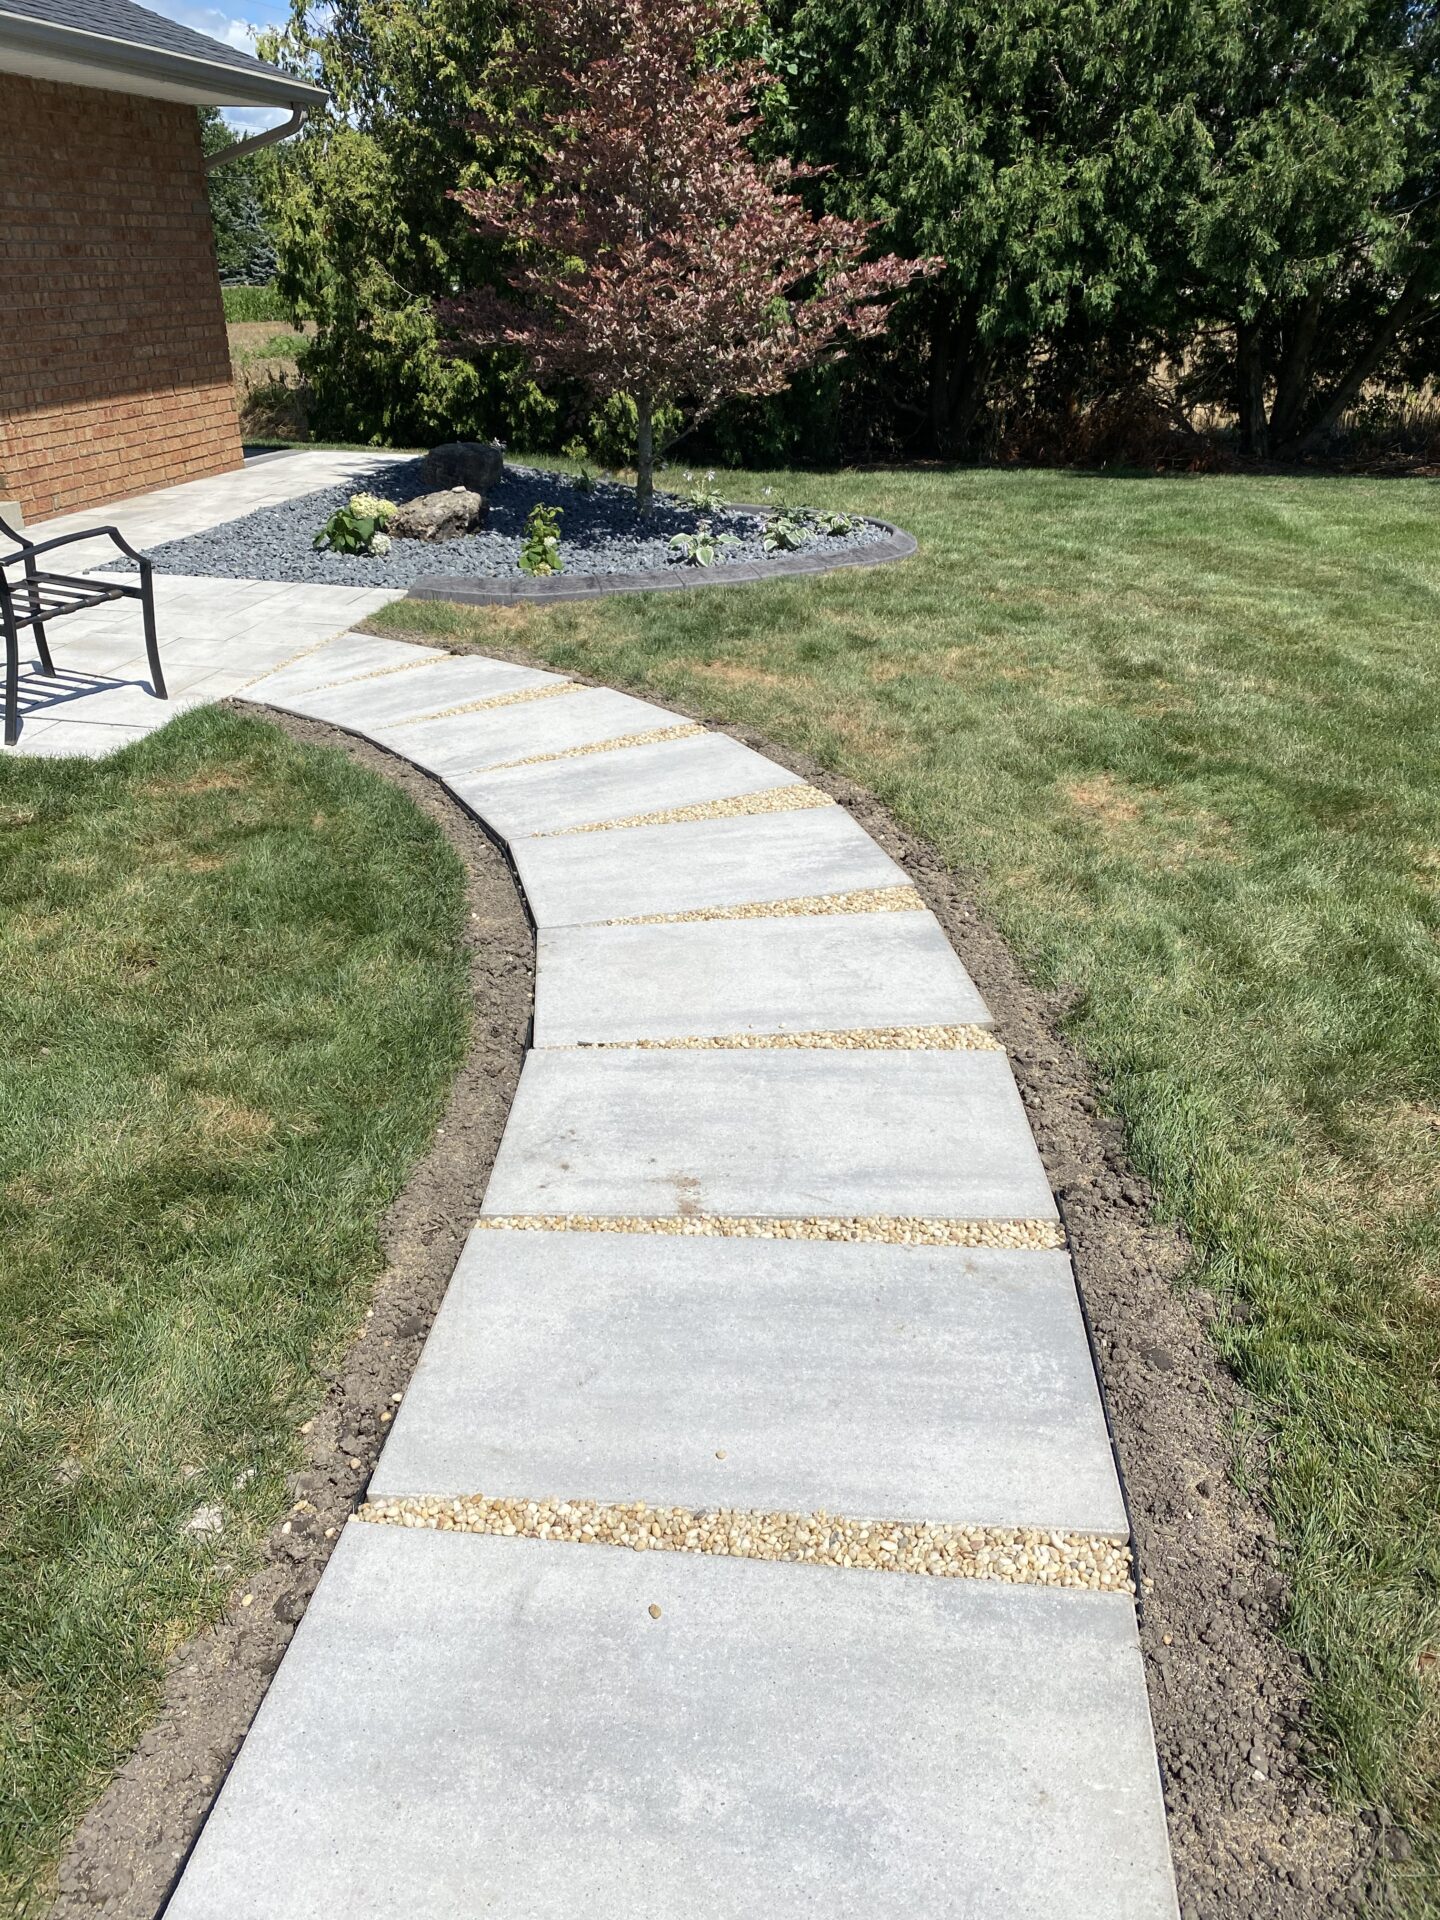 This is a well-manicured garden pathway with rectangular stepping stones and gravel accents, leading towards a patio area with a seating arrangement.